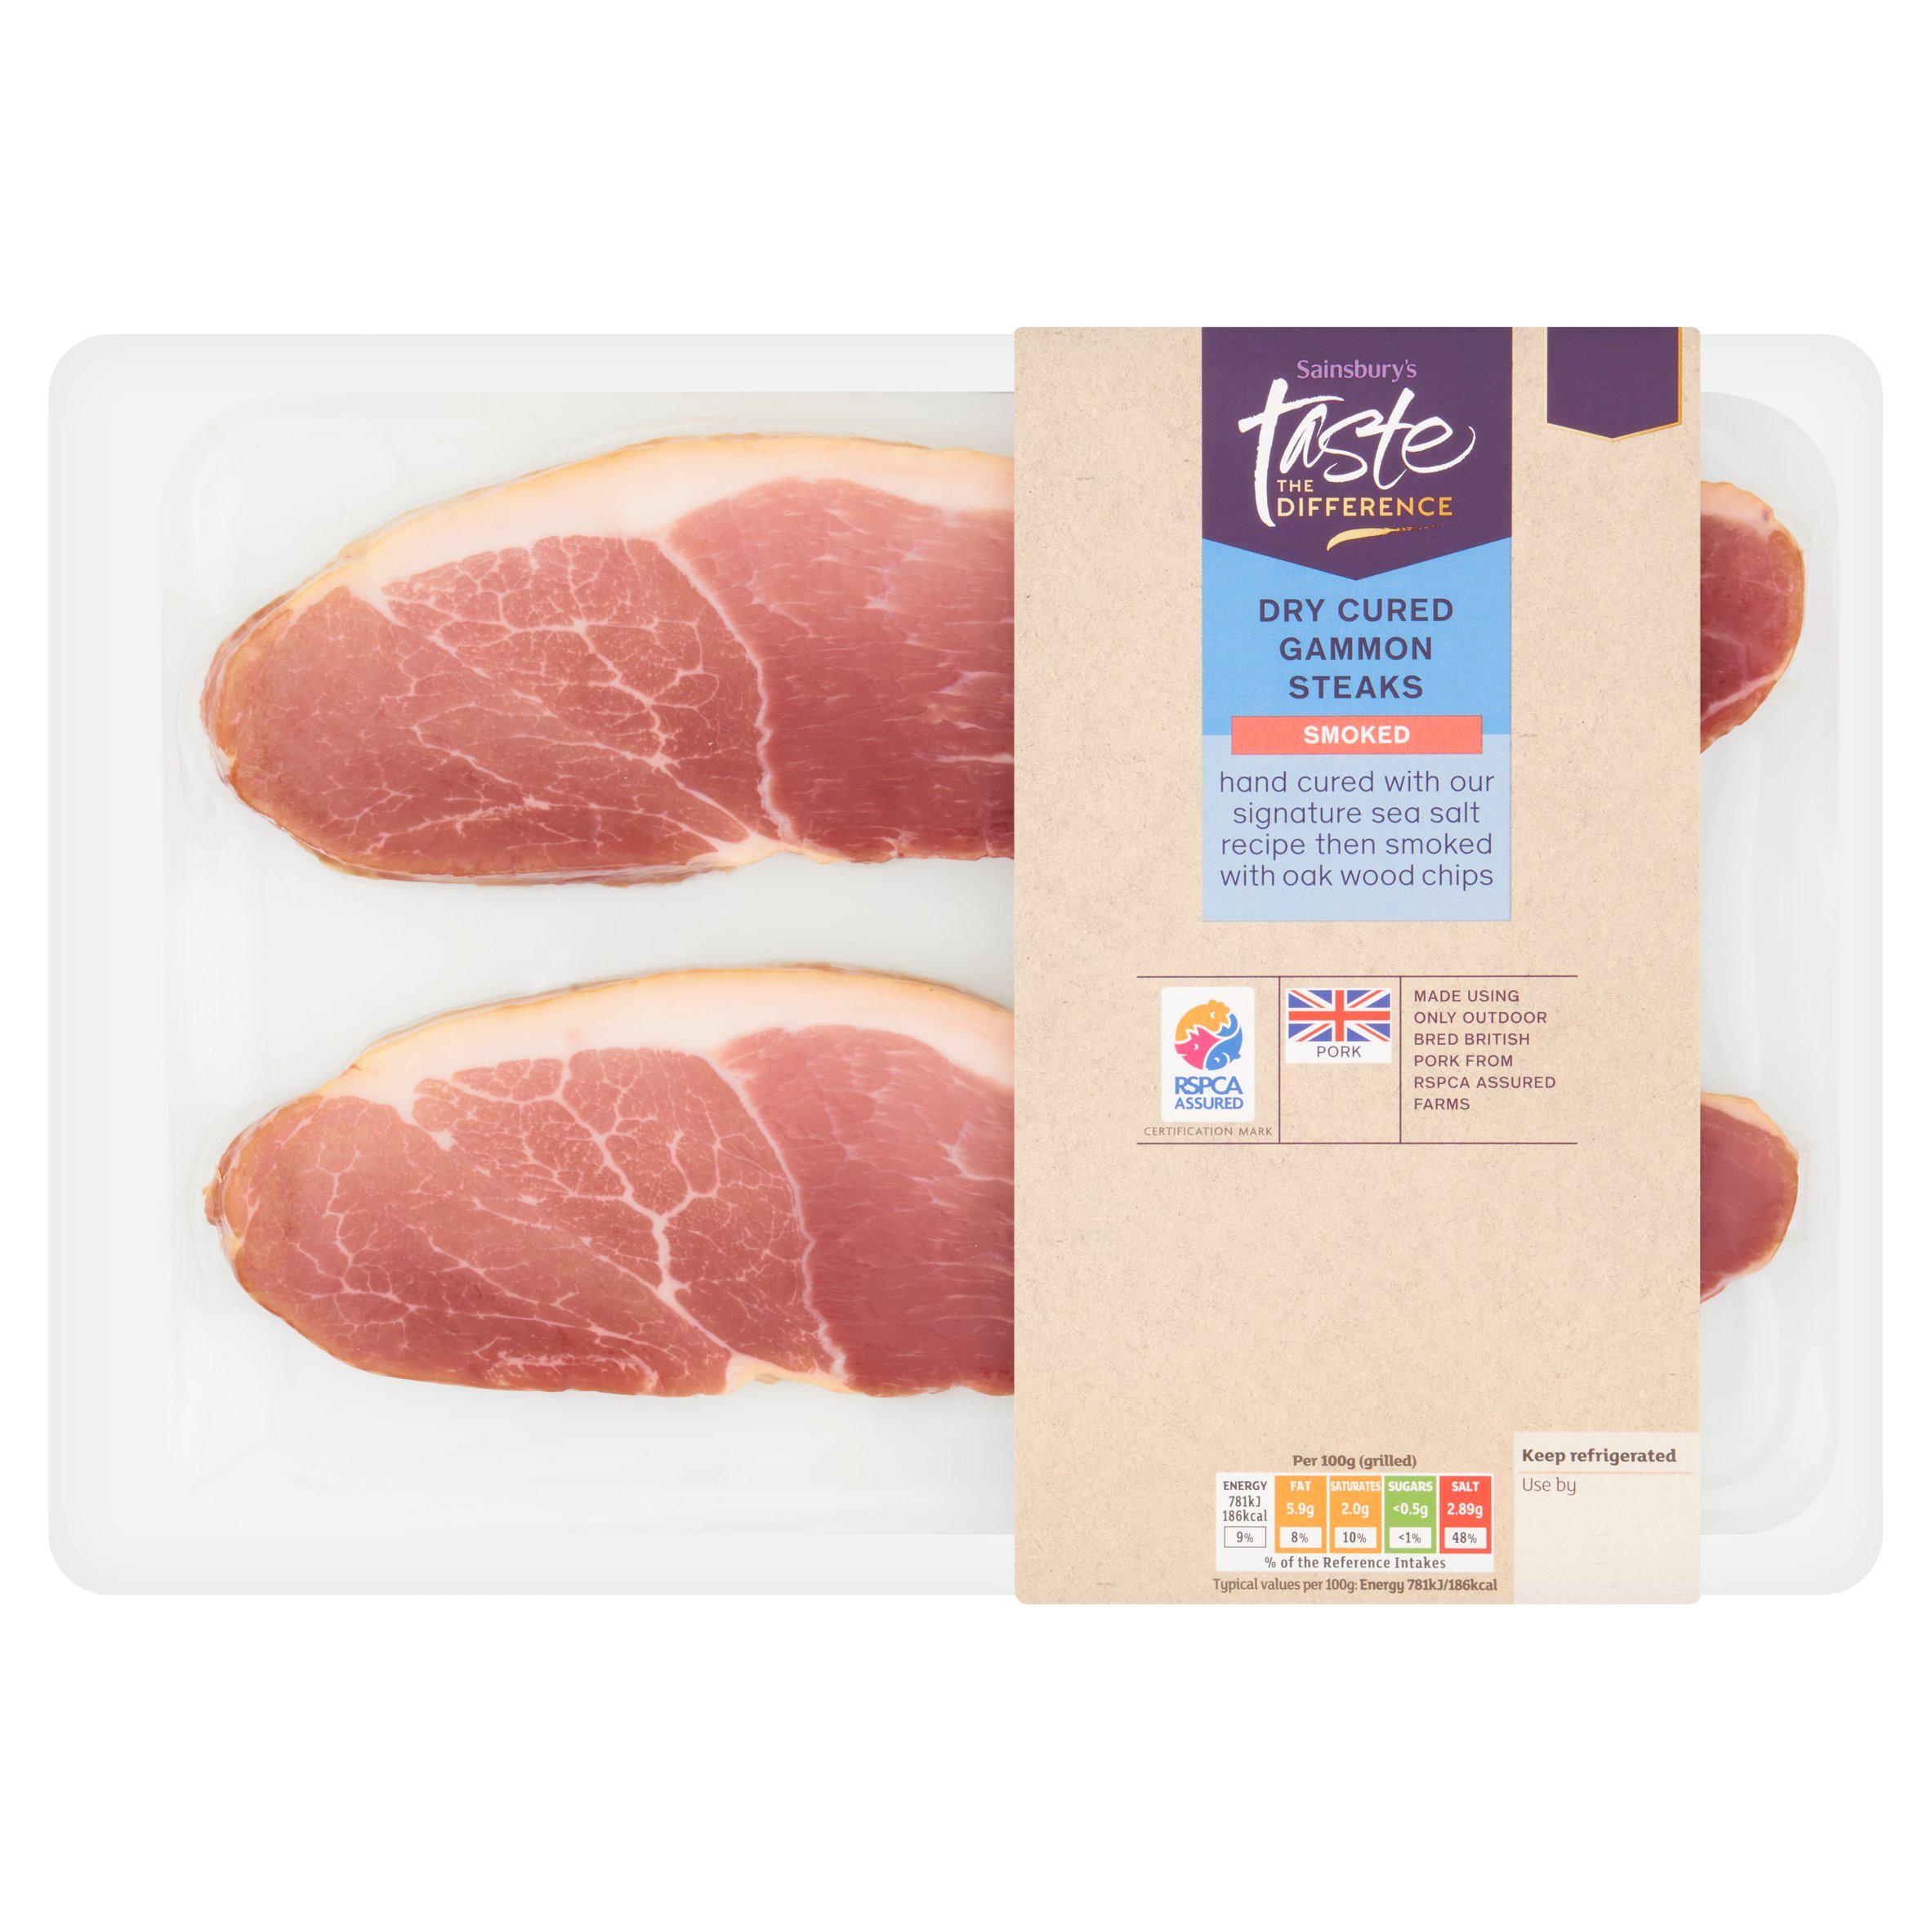 Sainsbury's Dry Cured Smoked Gammon Steaks, Taste the Difference 300g